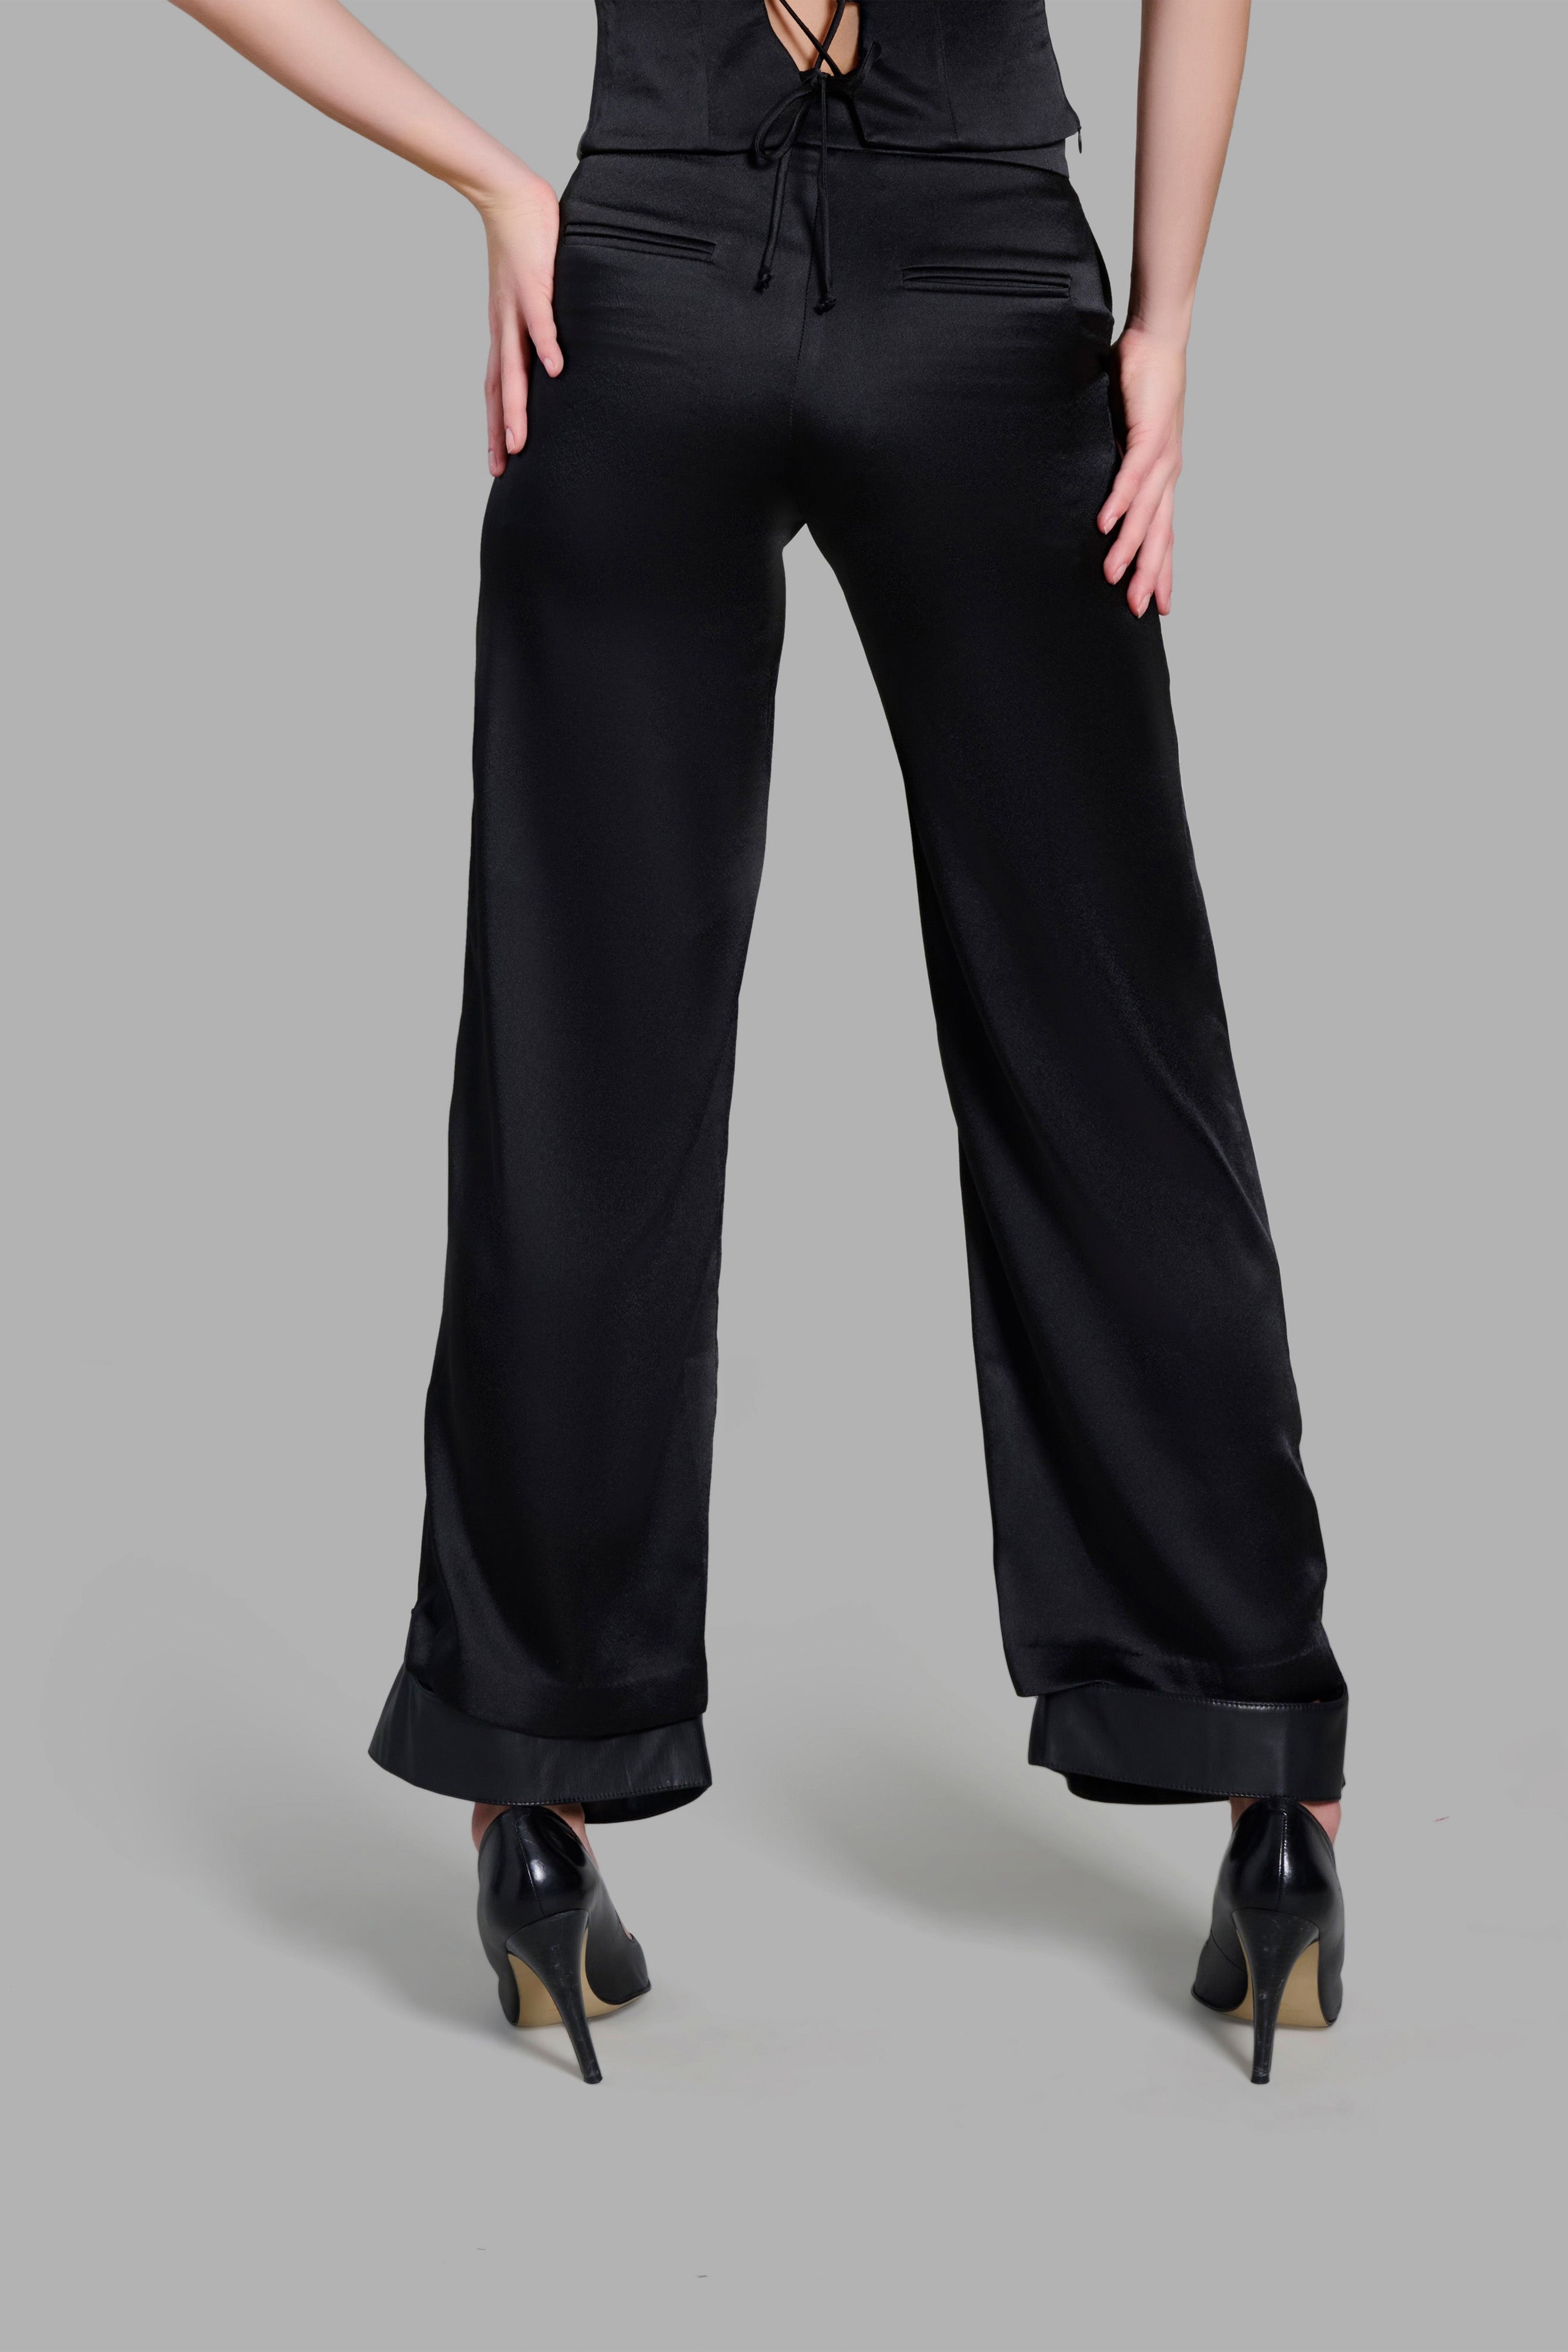 Black Satin Pants with Leather Hems